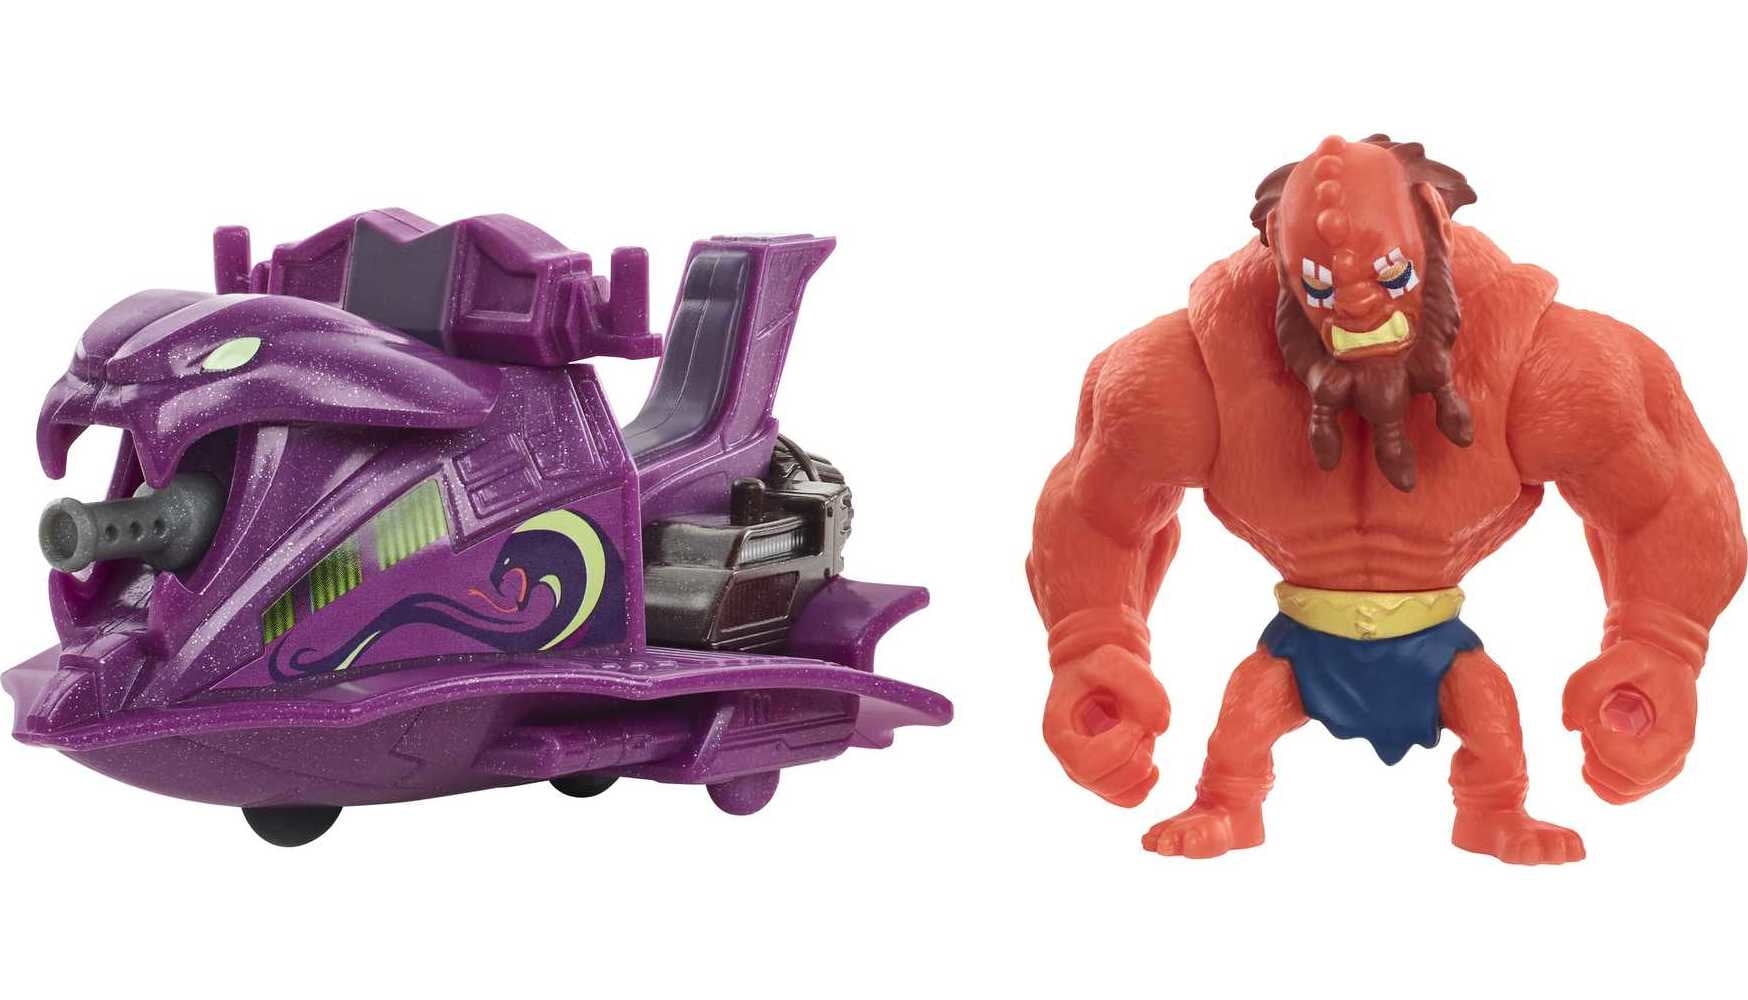 He-Man & The Masters of The Universe Revelations 2'' Mini Figures & Vehicles Toys: Beast Man & War Sled $4.04 + Free Shipping w/ Prime or on $35+